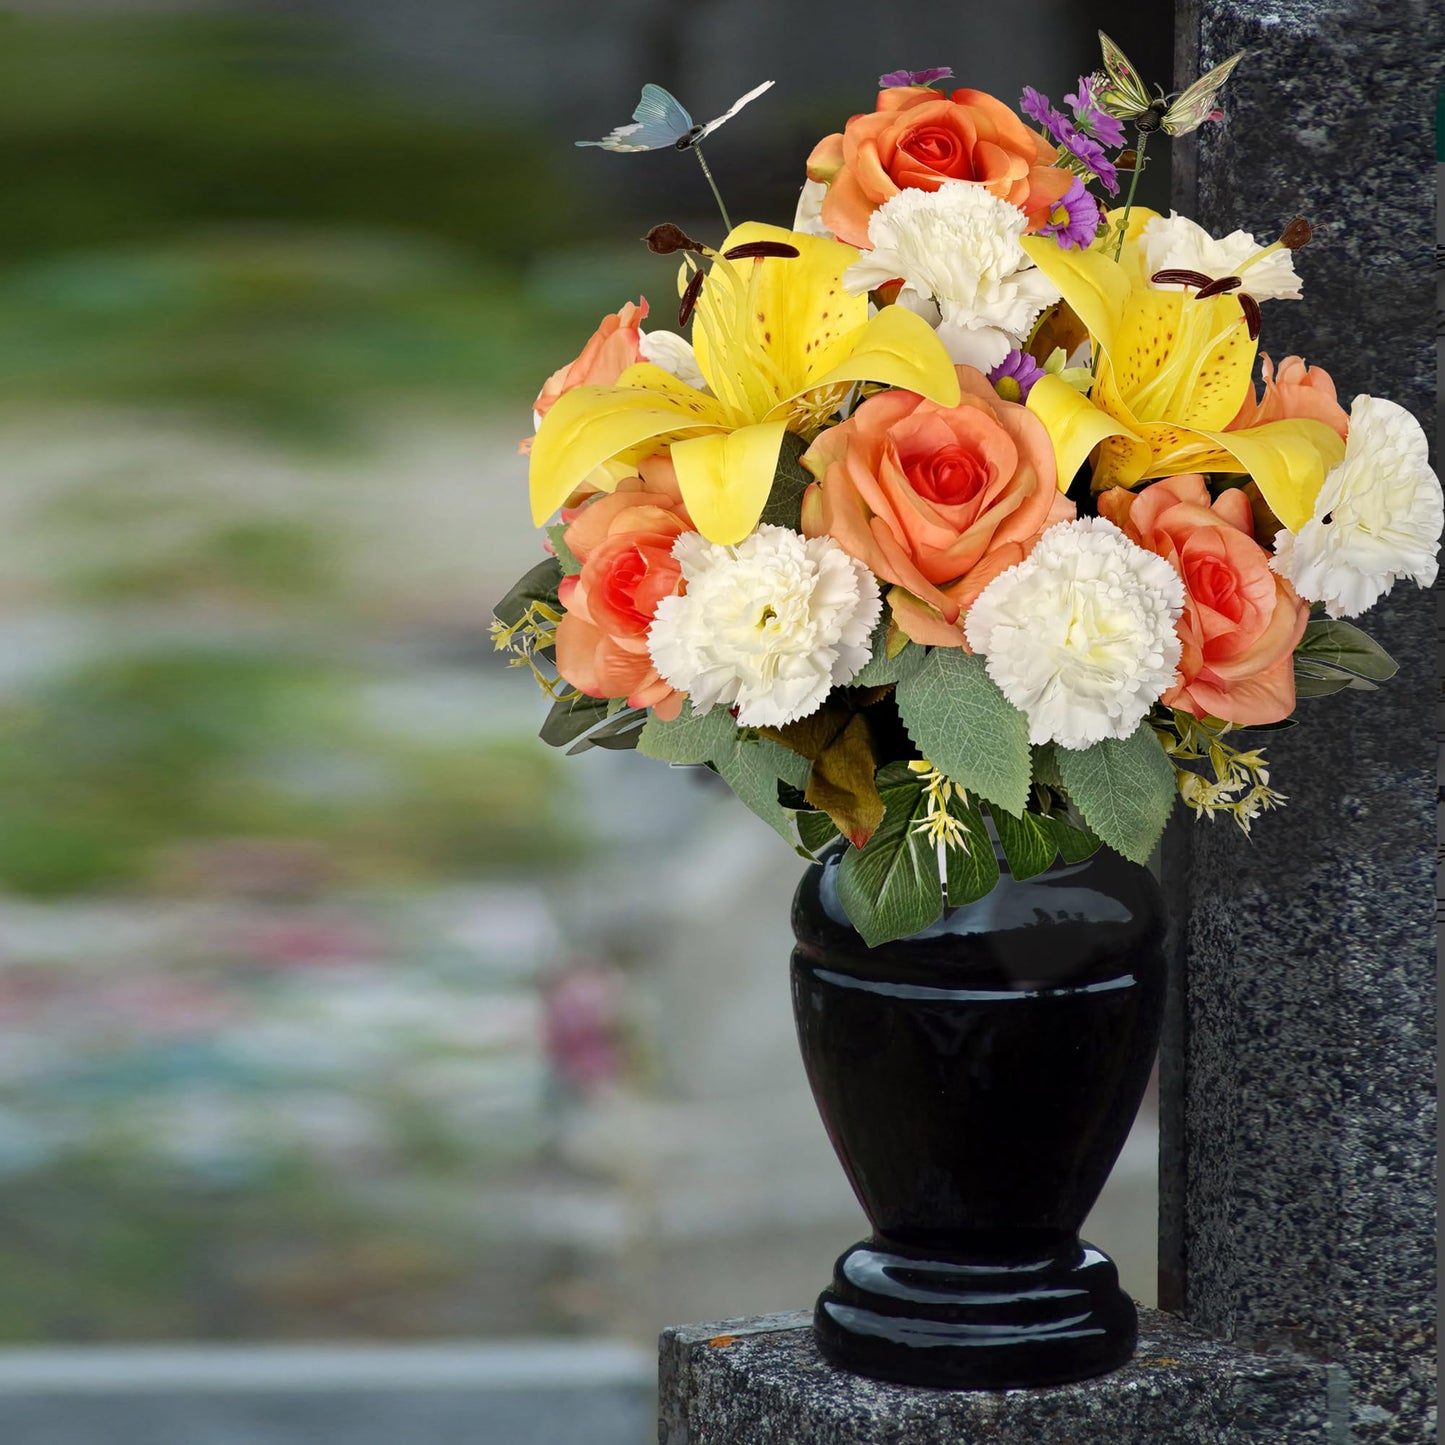 Saxili Silk Artificial Cemetery Flowers - Vivid Spring Grave Flower - Outdoor Headstone Flower Decorations - Lily Rose Carnations